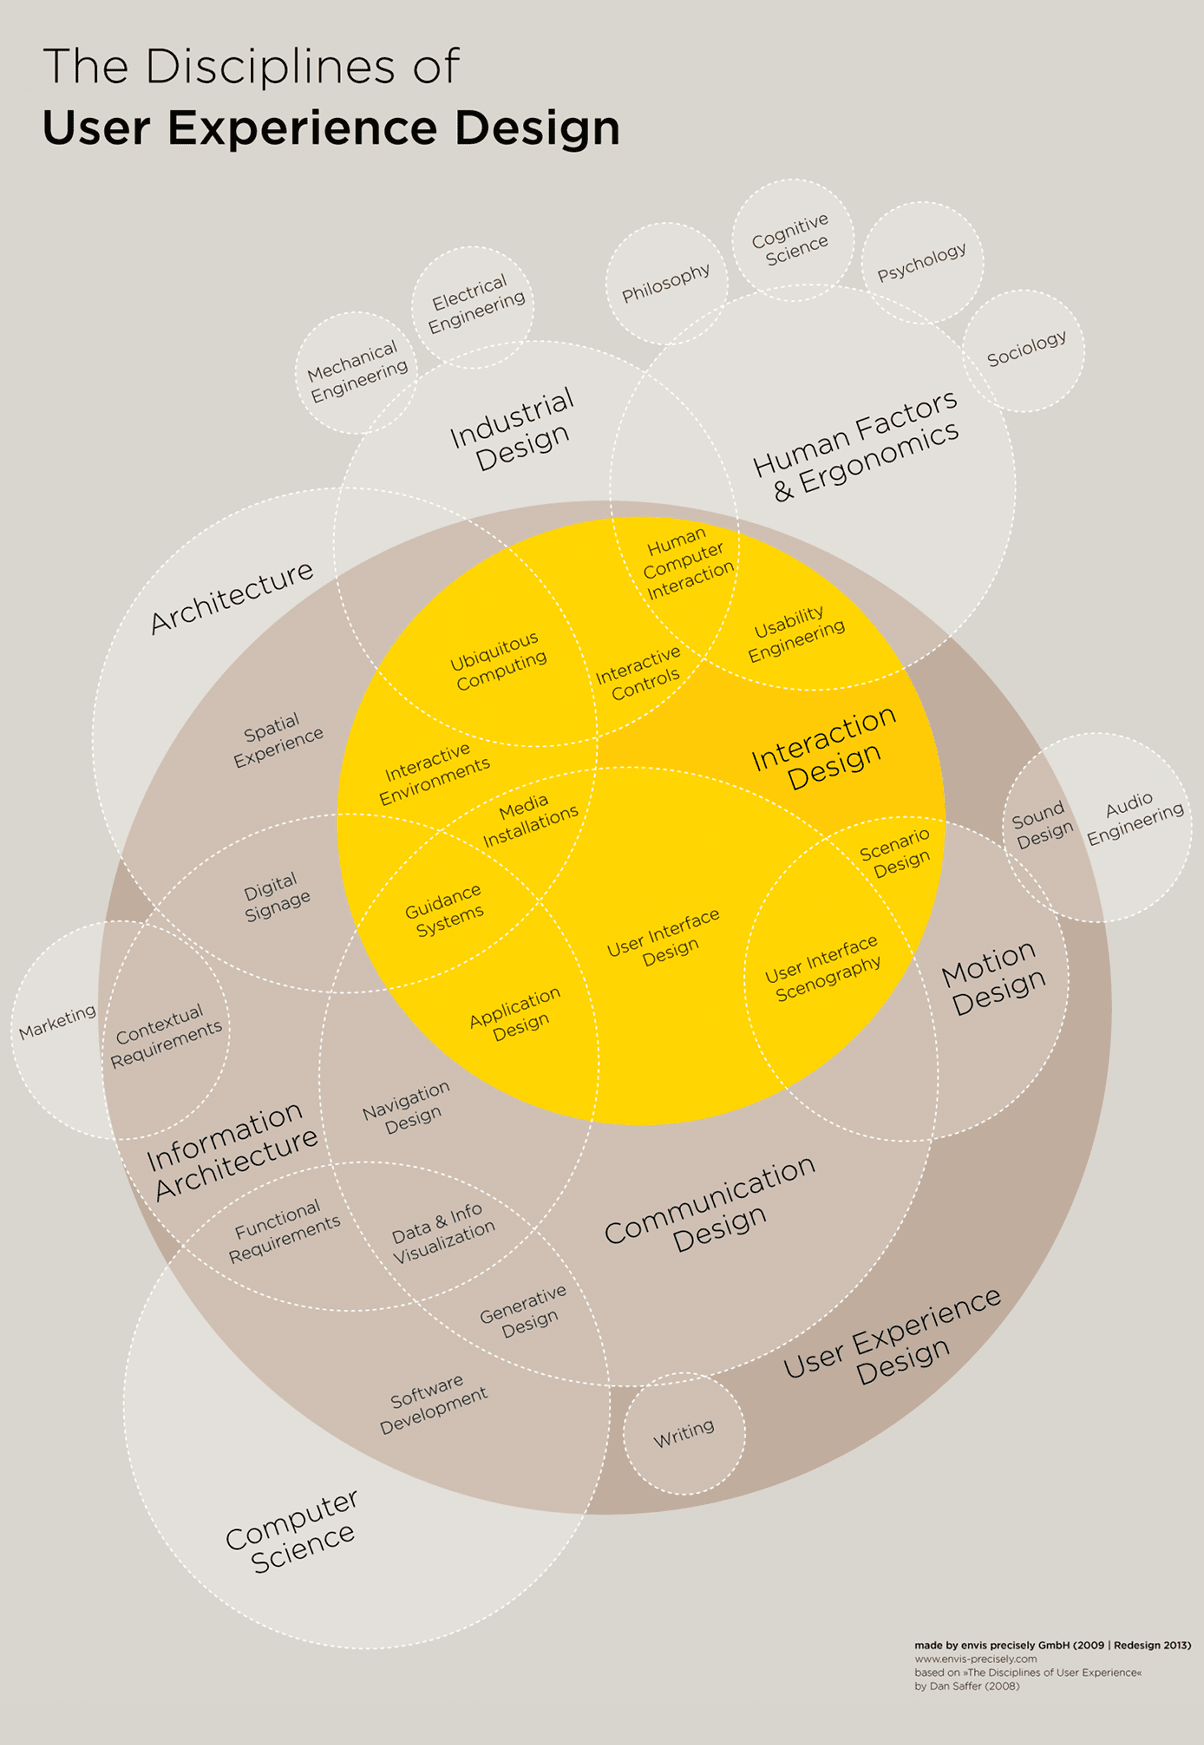 The Disciplines of User Experience Design